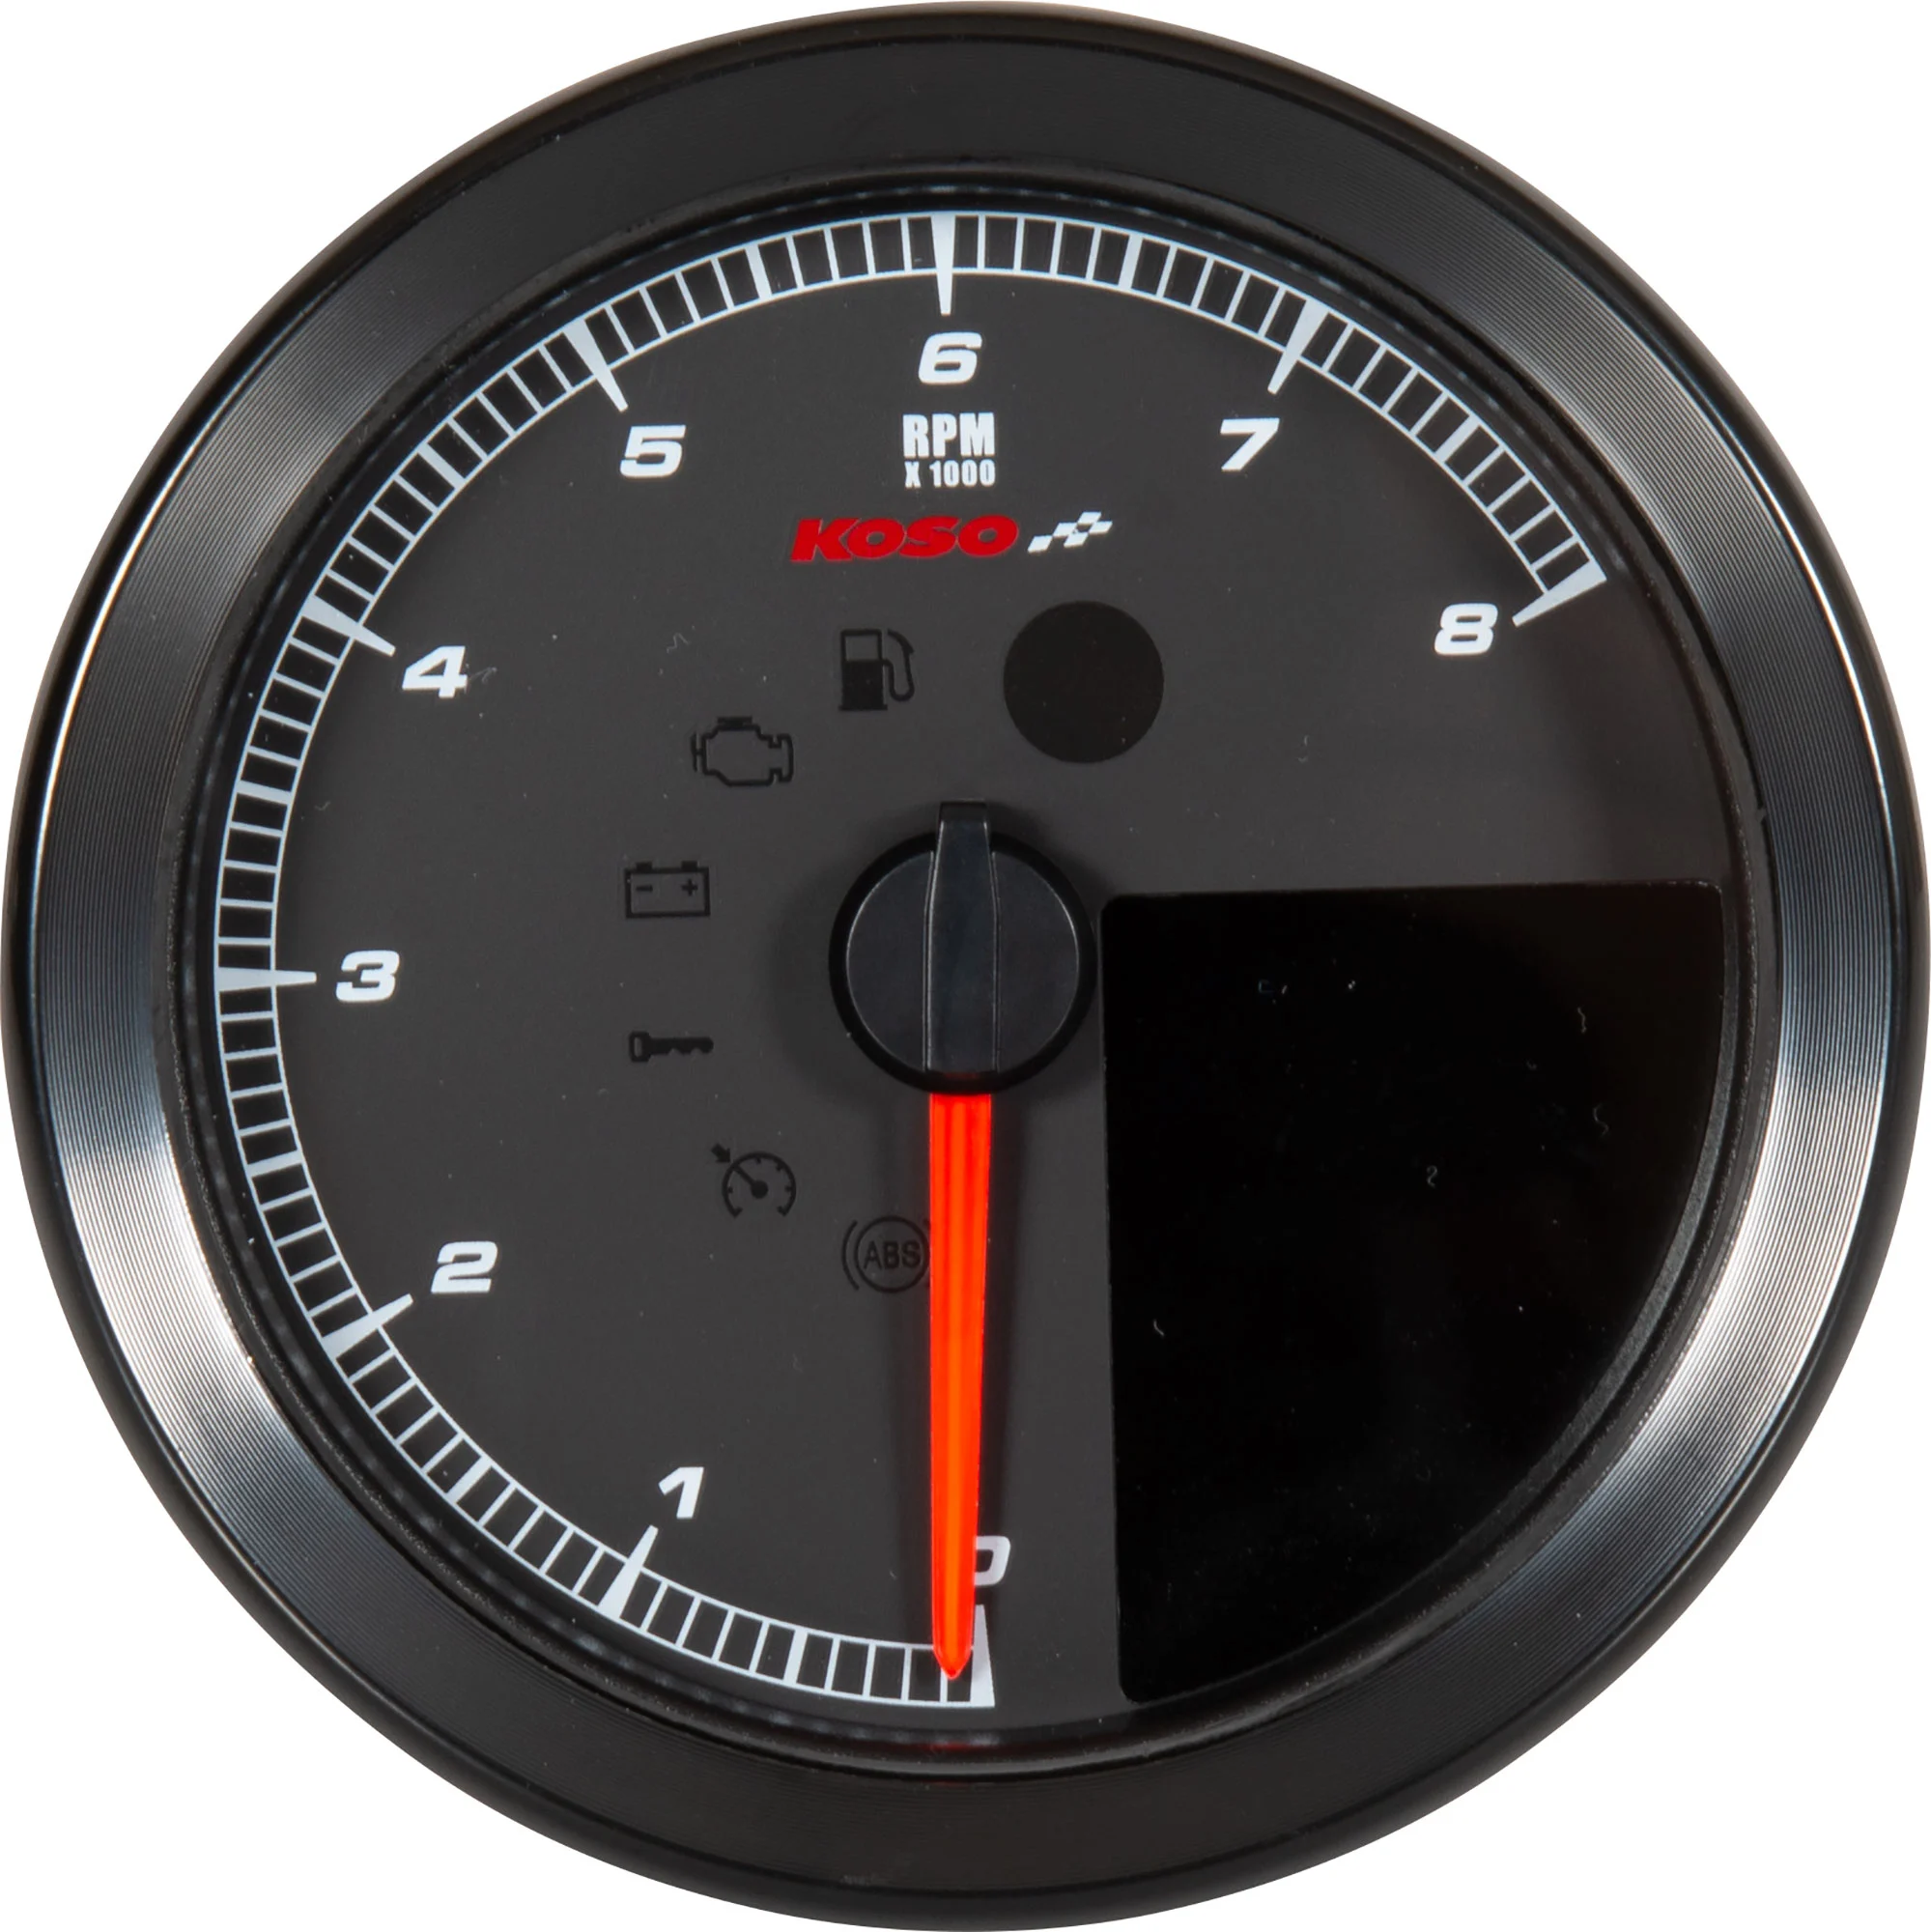 Koso Koso HD-01-04 tachometer/speedometer for Harley Sportster and Dyna